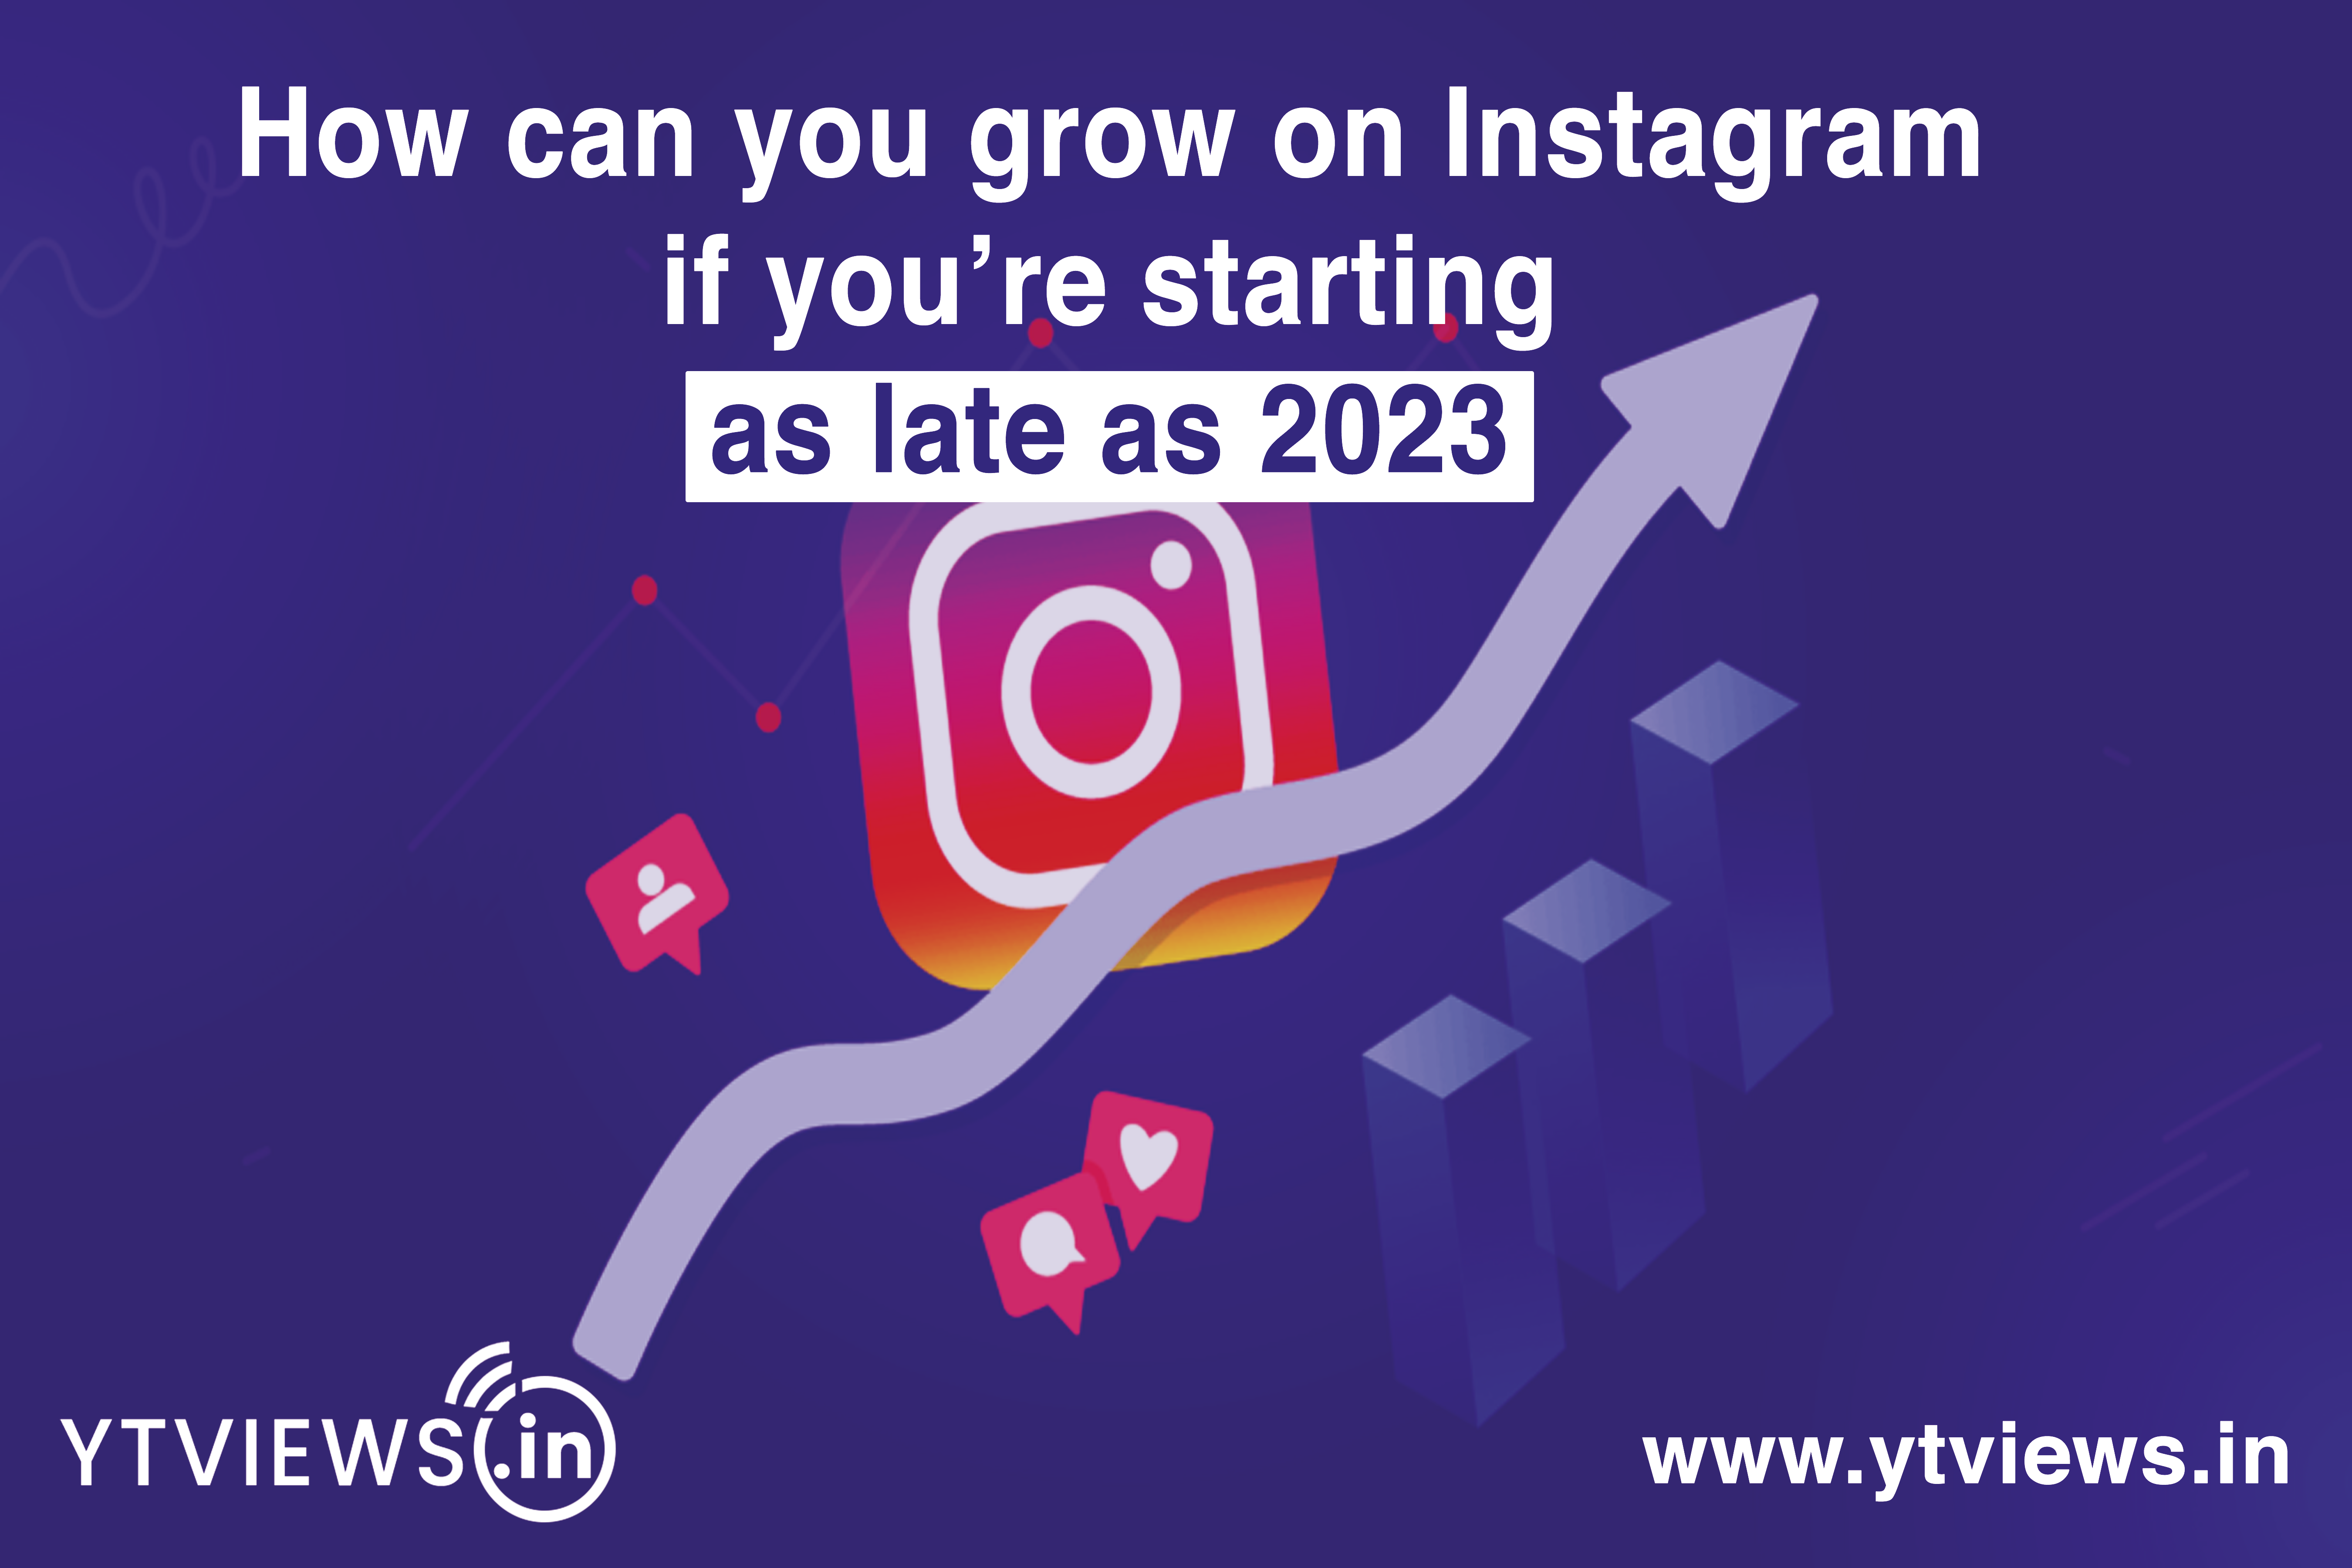 How can you grow on Instagram if you’re starting as late as 2023?